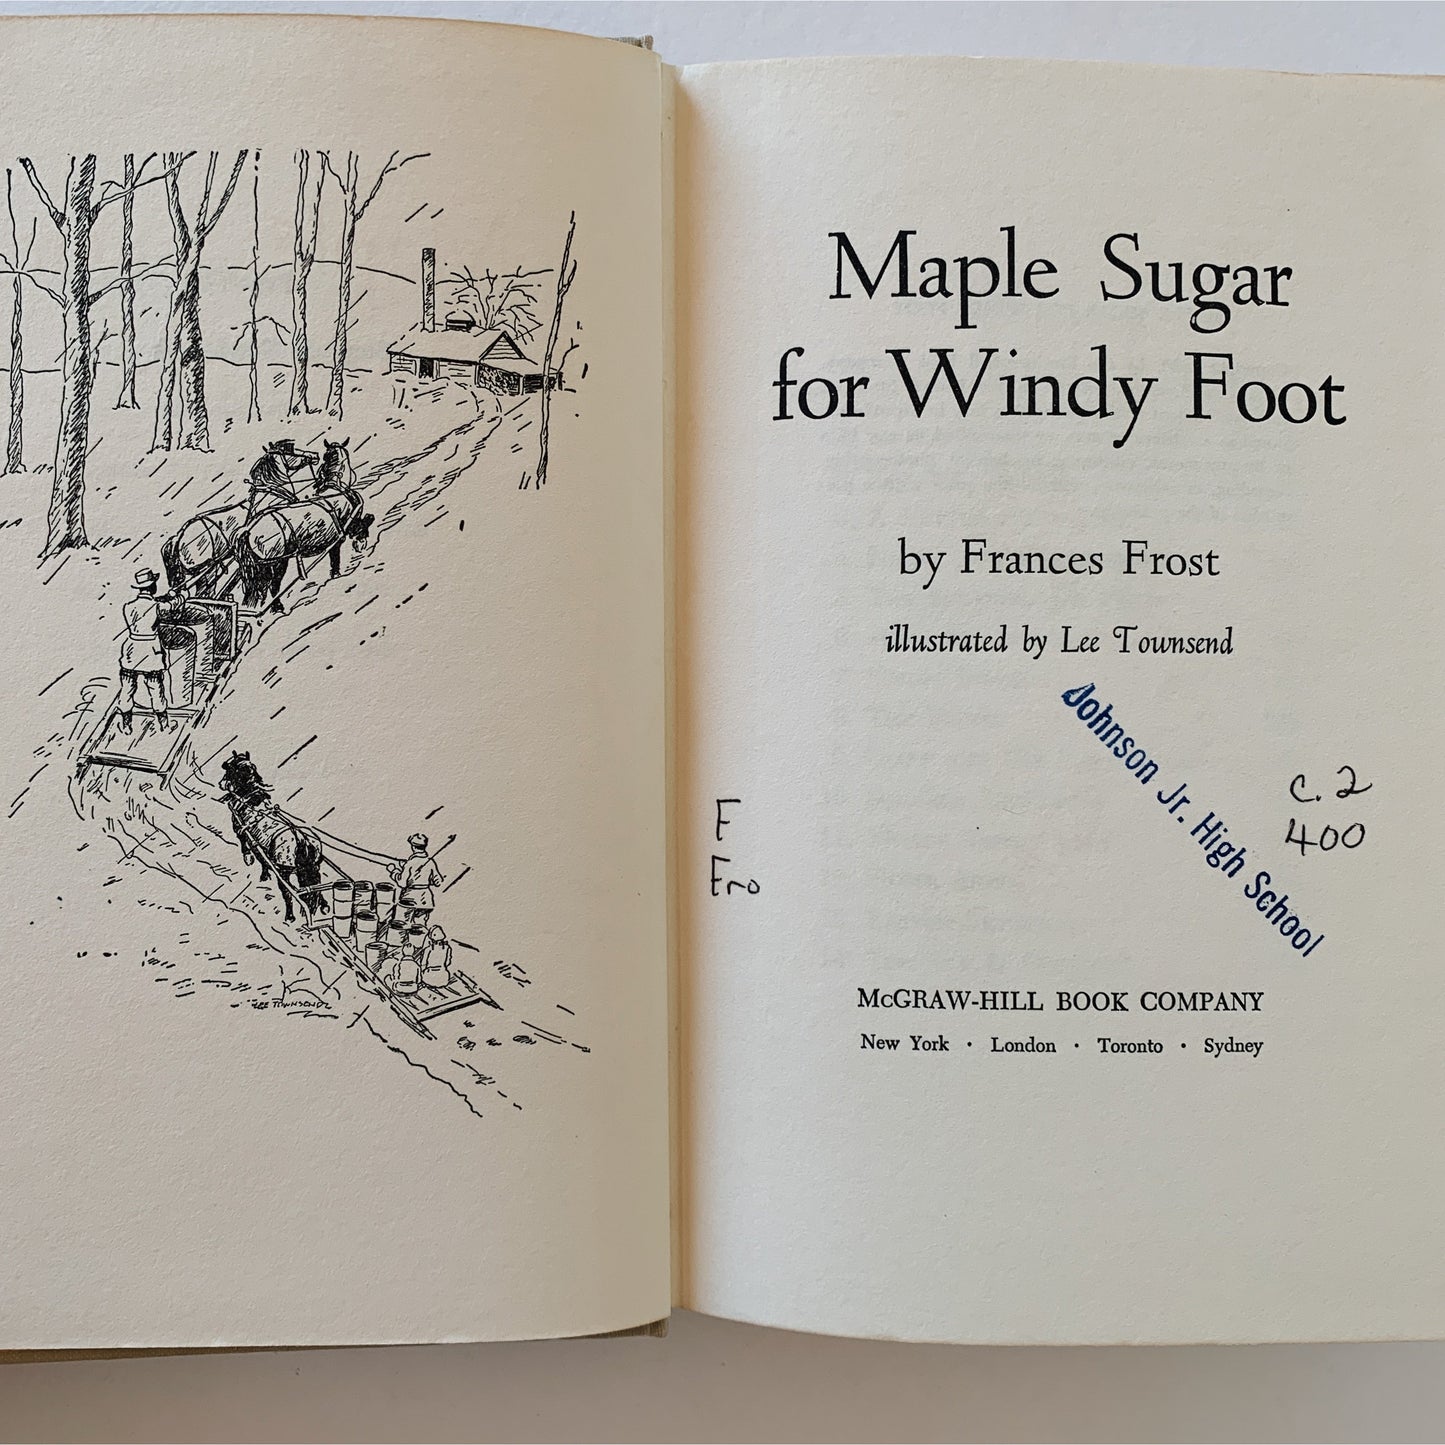 Maple Sugar for Windy Foot, Frances Frost, 1950, Kids Historical Fiction